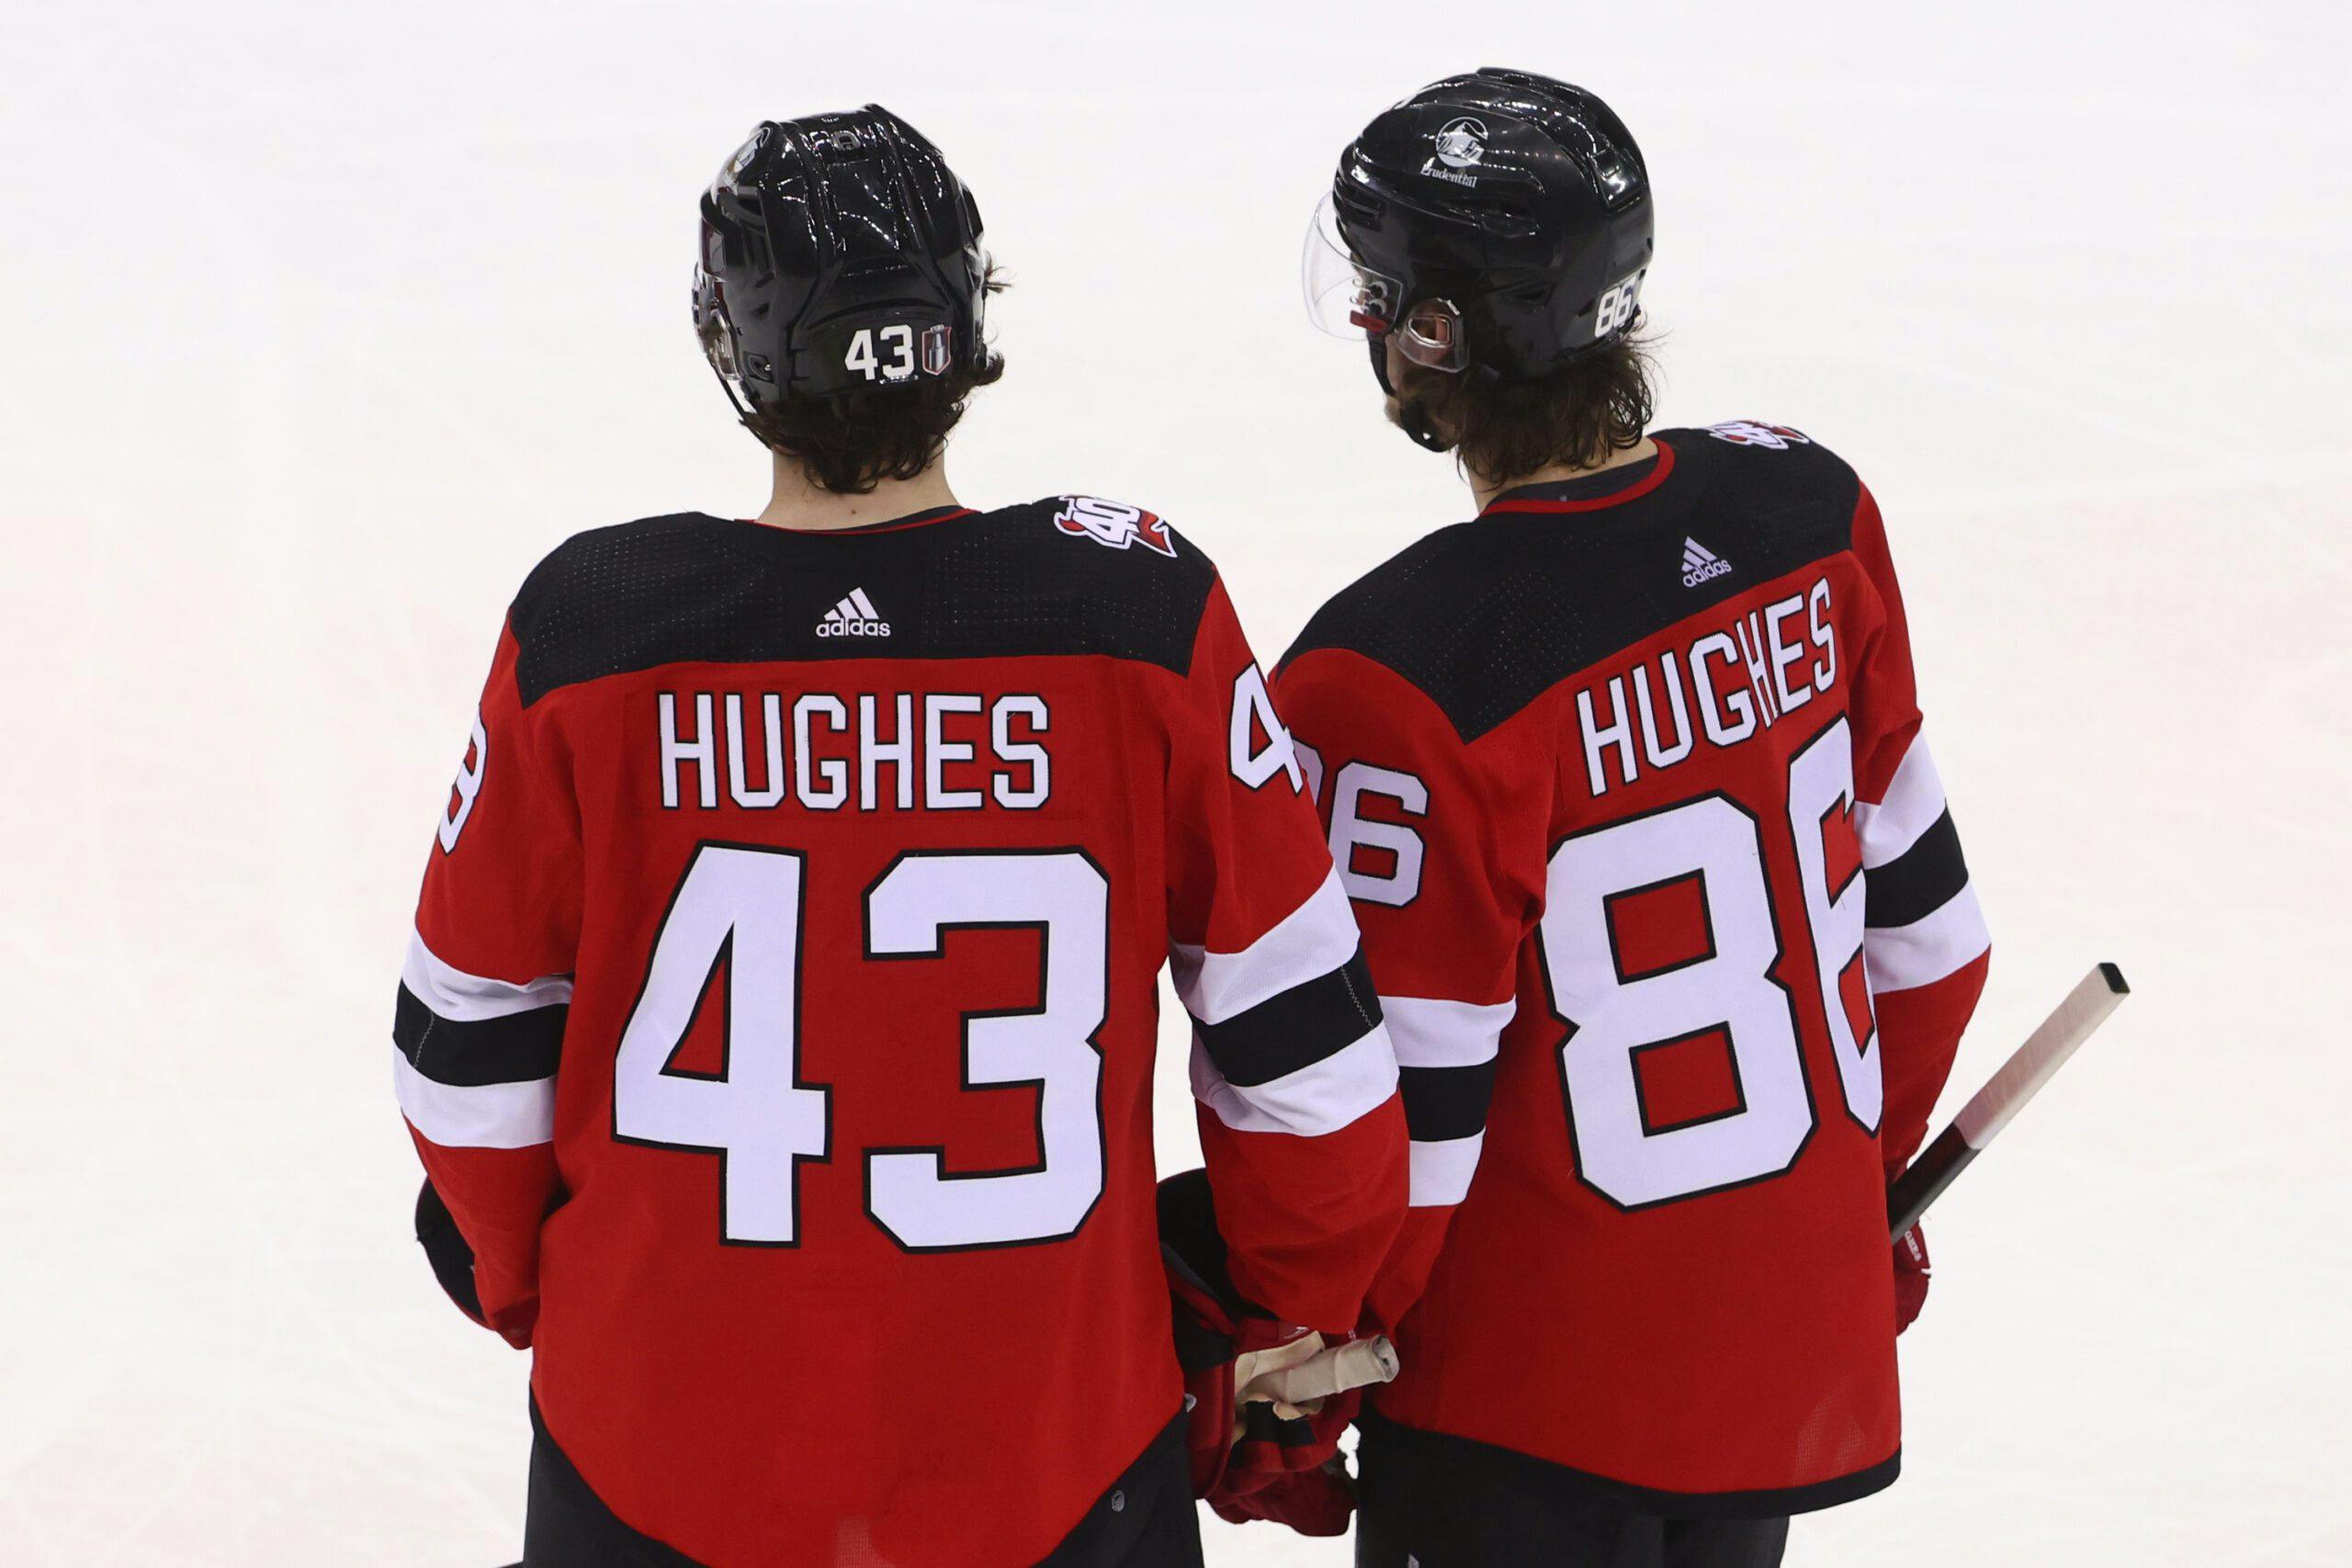 The Hughes Brothers’ NHL dominance is just getting started